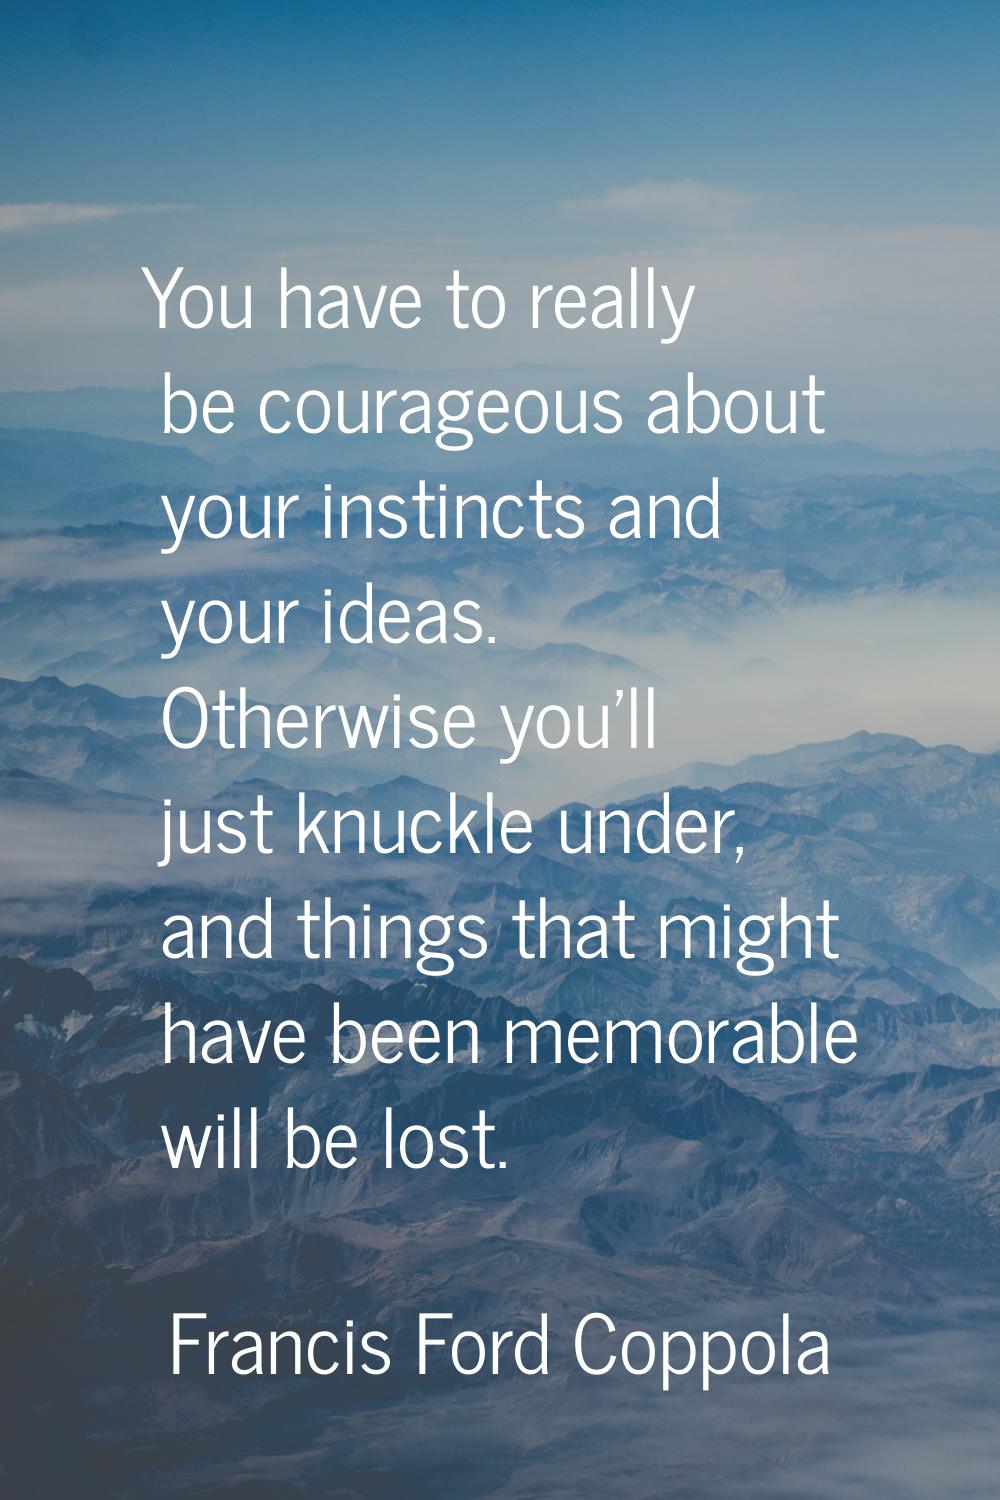 You have to really be courageous about your instincts and your ideas. Otherwise you'll just knuckle